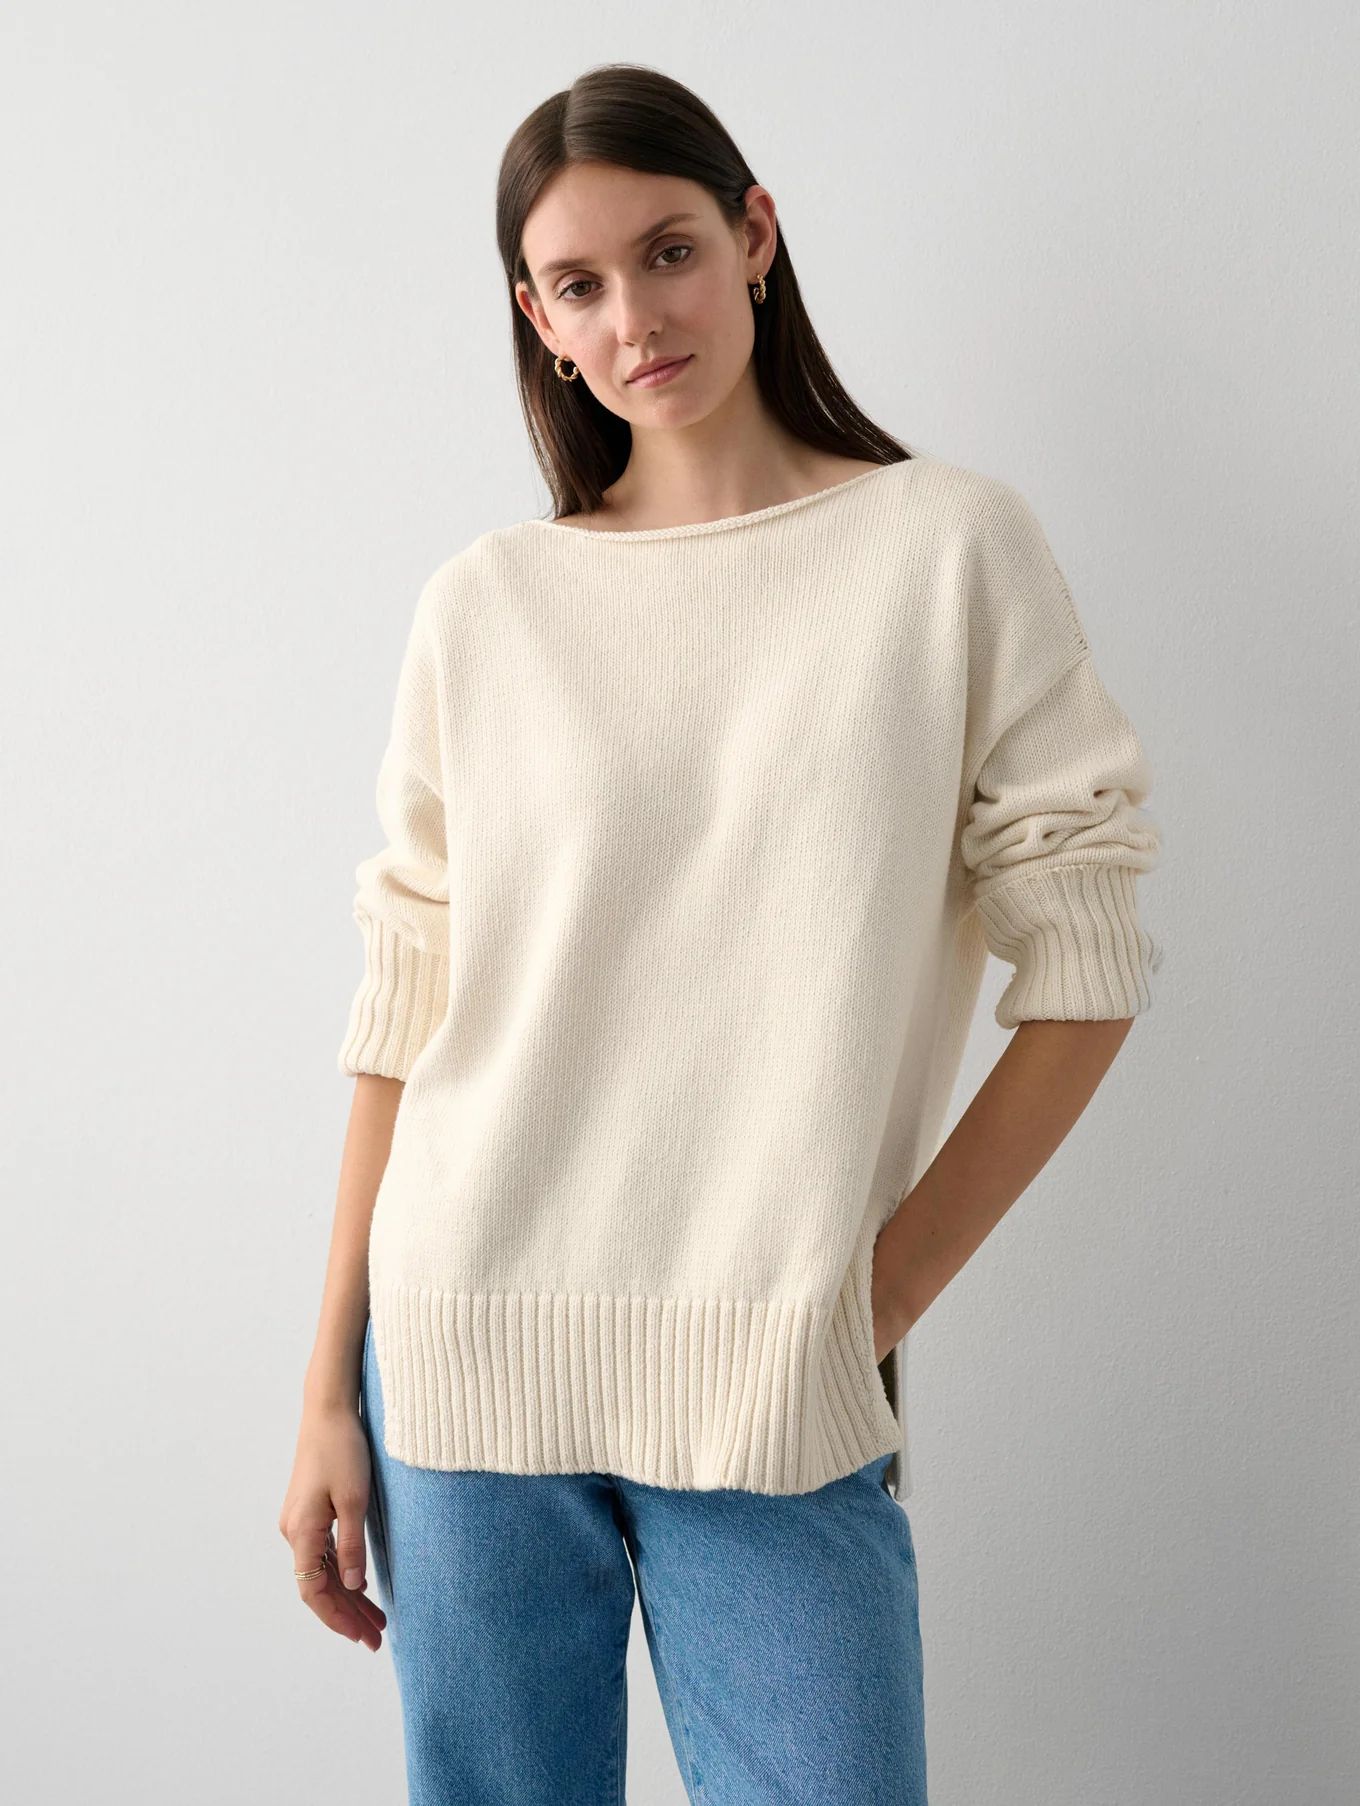 Cotton Boatneck Sweater | White and Warren